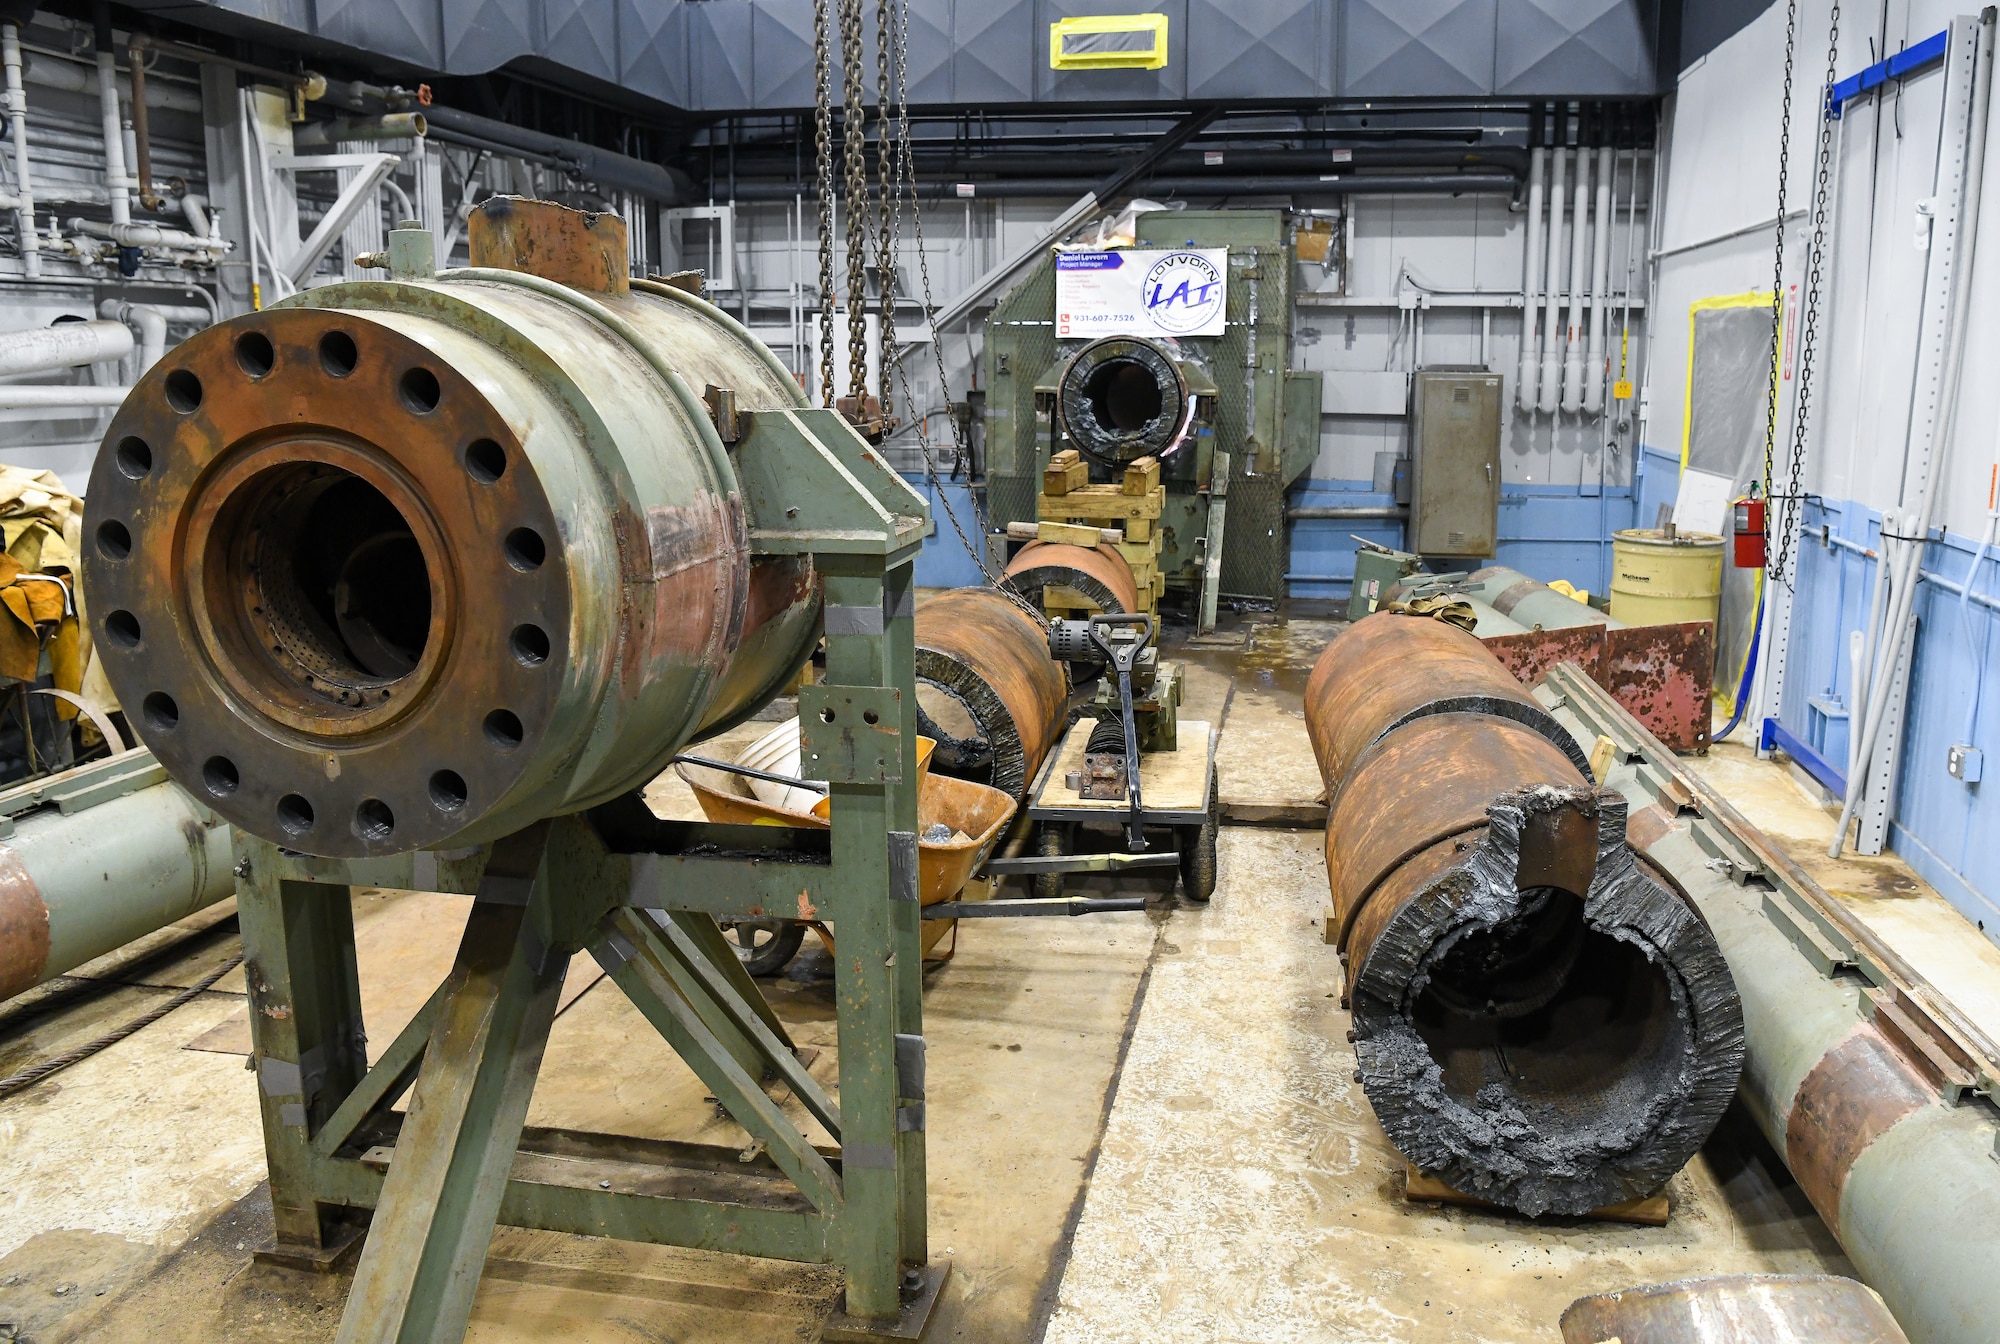 Prior to their removal, disassembled pieces of Tunnel E sit in a building that housed the old wind tunnel at the von Kármán Gas Dynamics Facility on Arnold Air Force Base, Tenn., March 4, 2022.